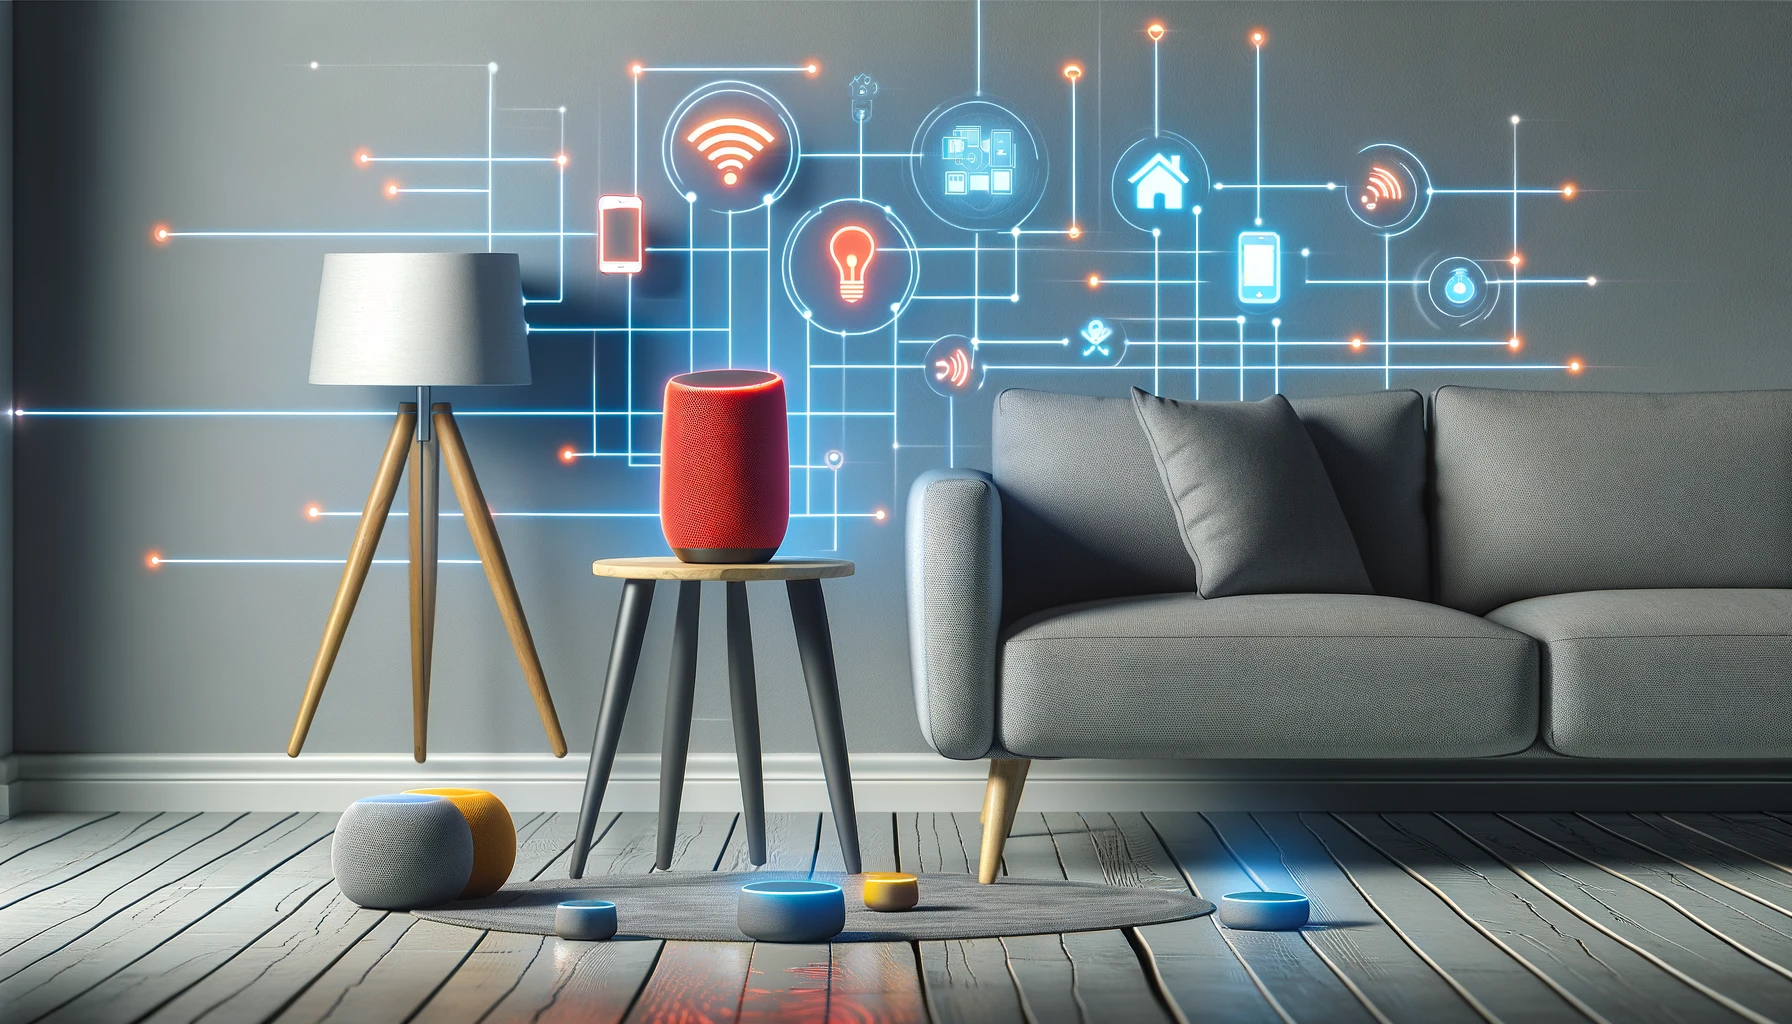 A modern living room with light and dark gray decor features a bright red smart speaker connected to various smart home devices in yellow and blue by glowing blue lines, symbolizing the initial phase of technological integration governed by human rules.